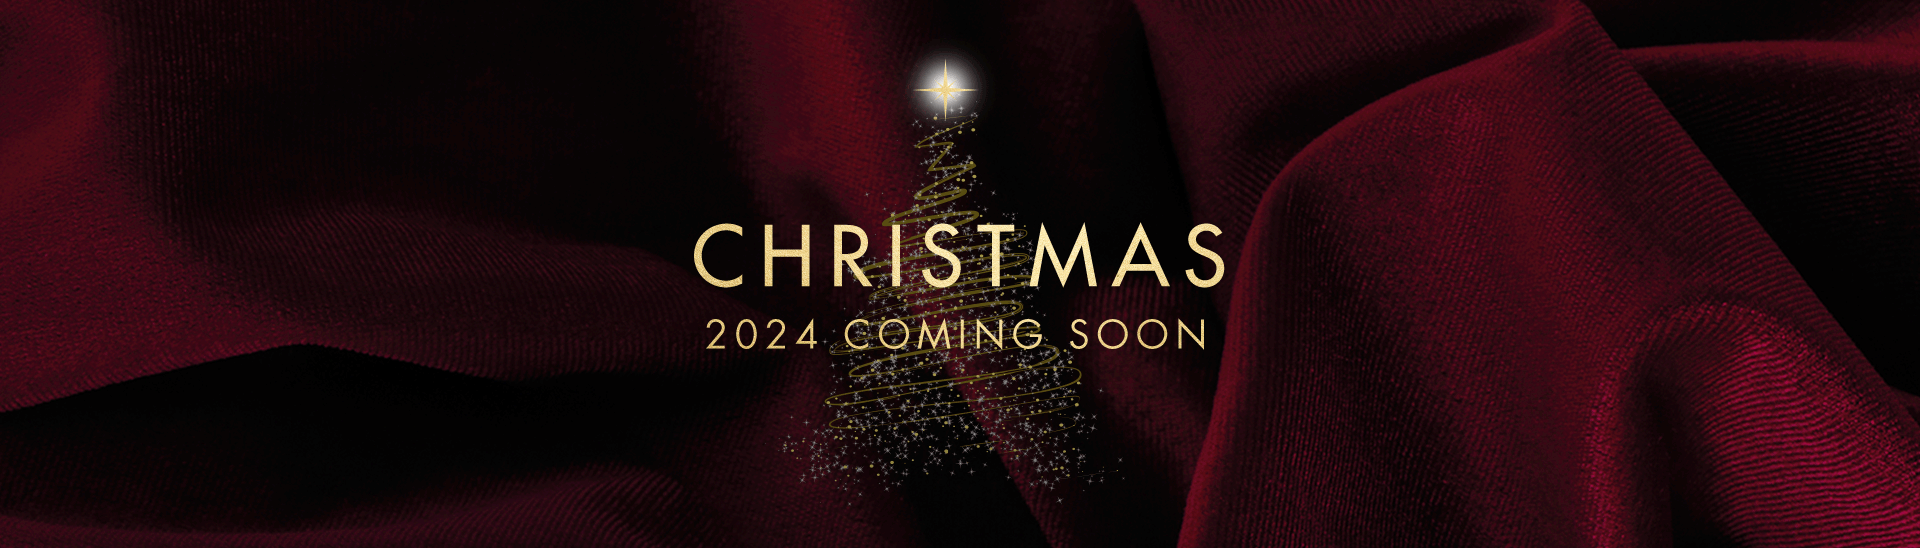 Christmas 2024 at Middlesex